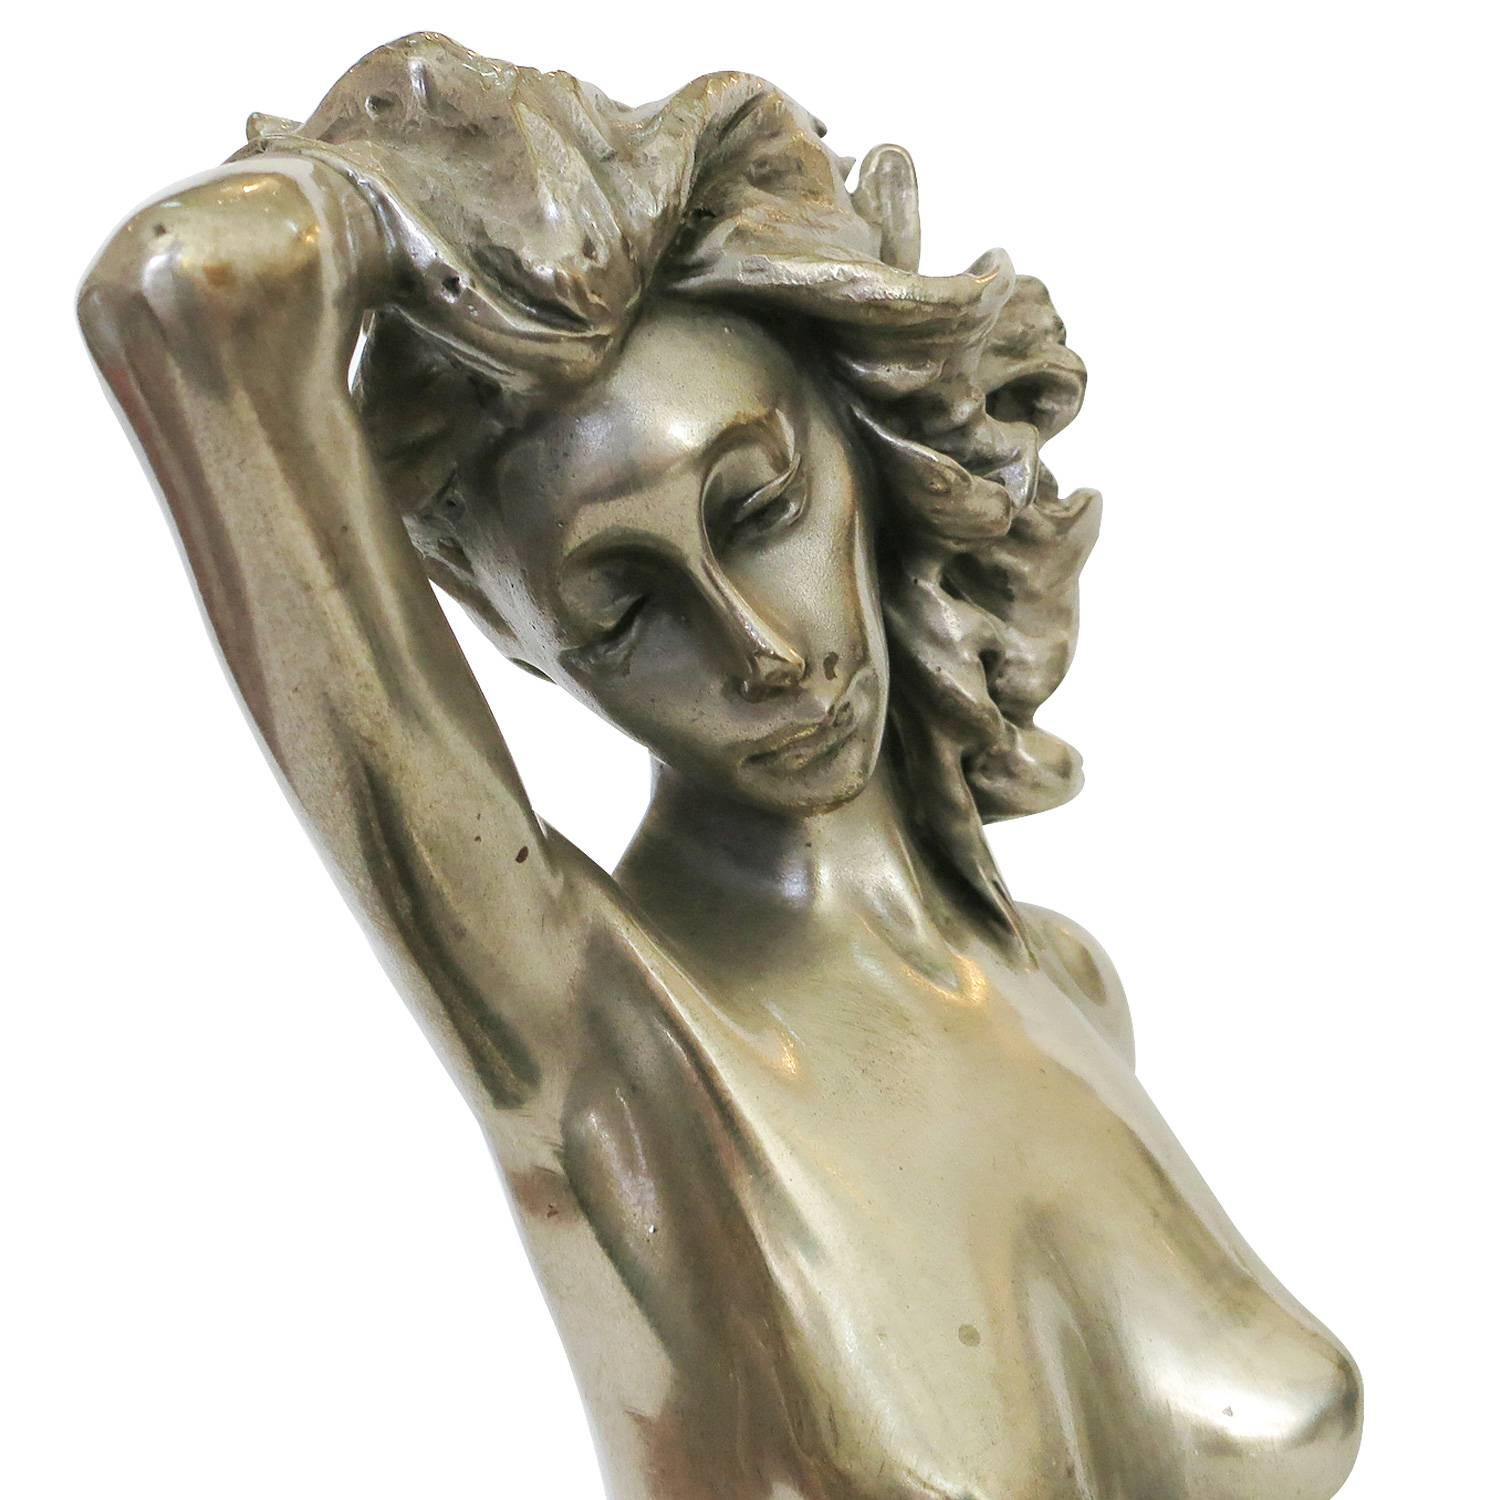 Contemporary 1970s Style Erotic Chromed Bronze Kneeling Nude Statue For Sale